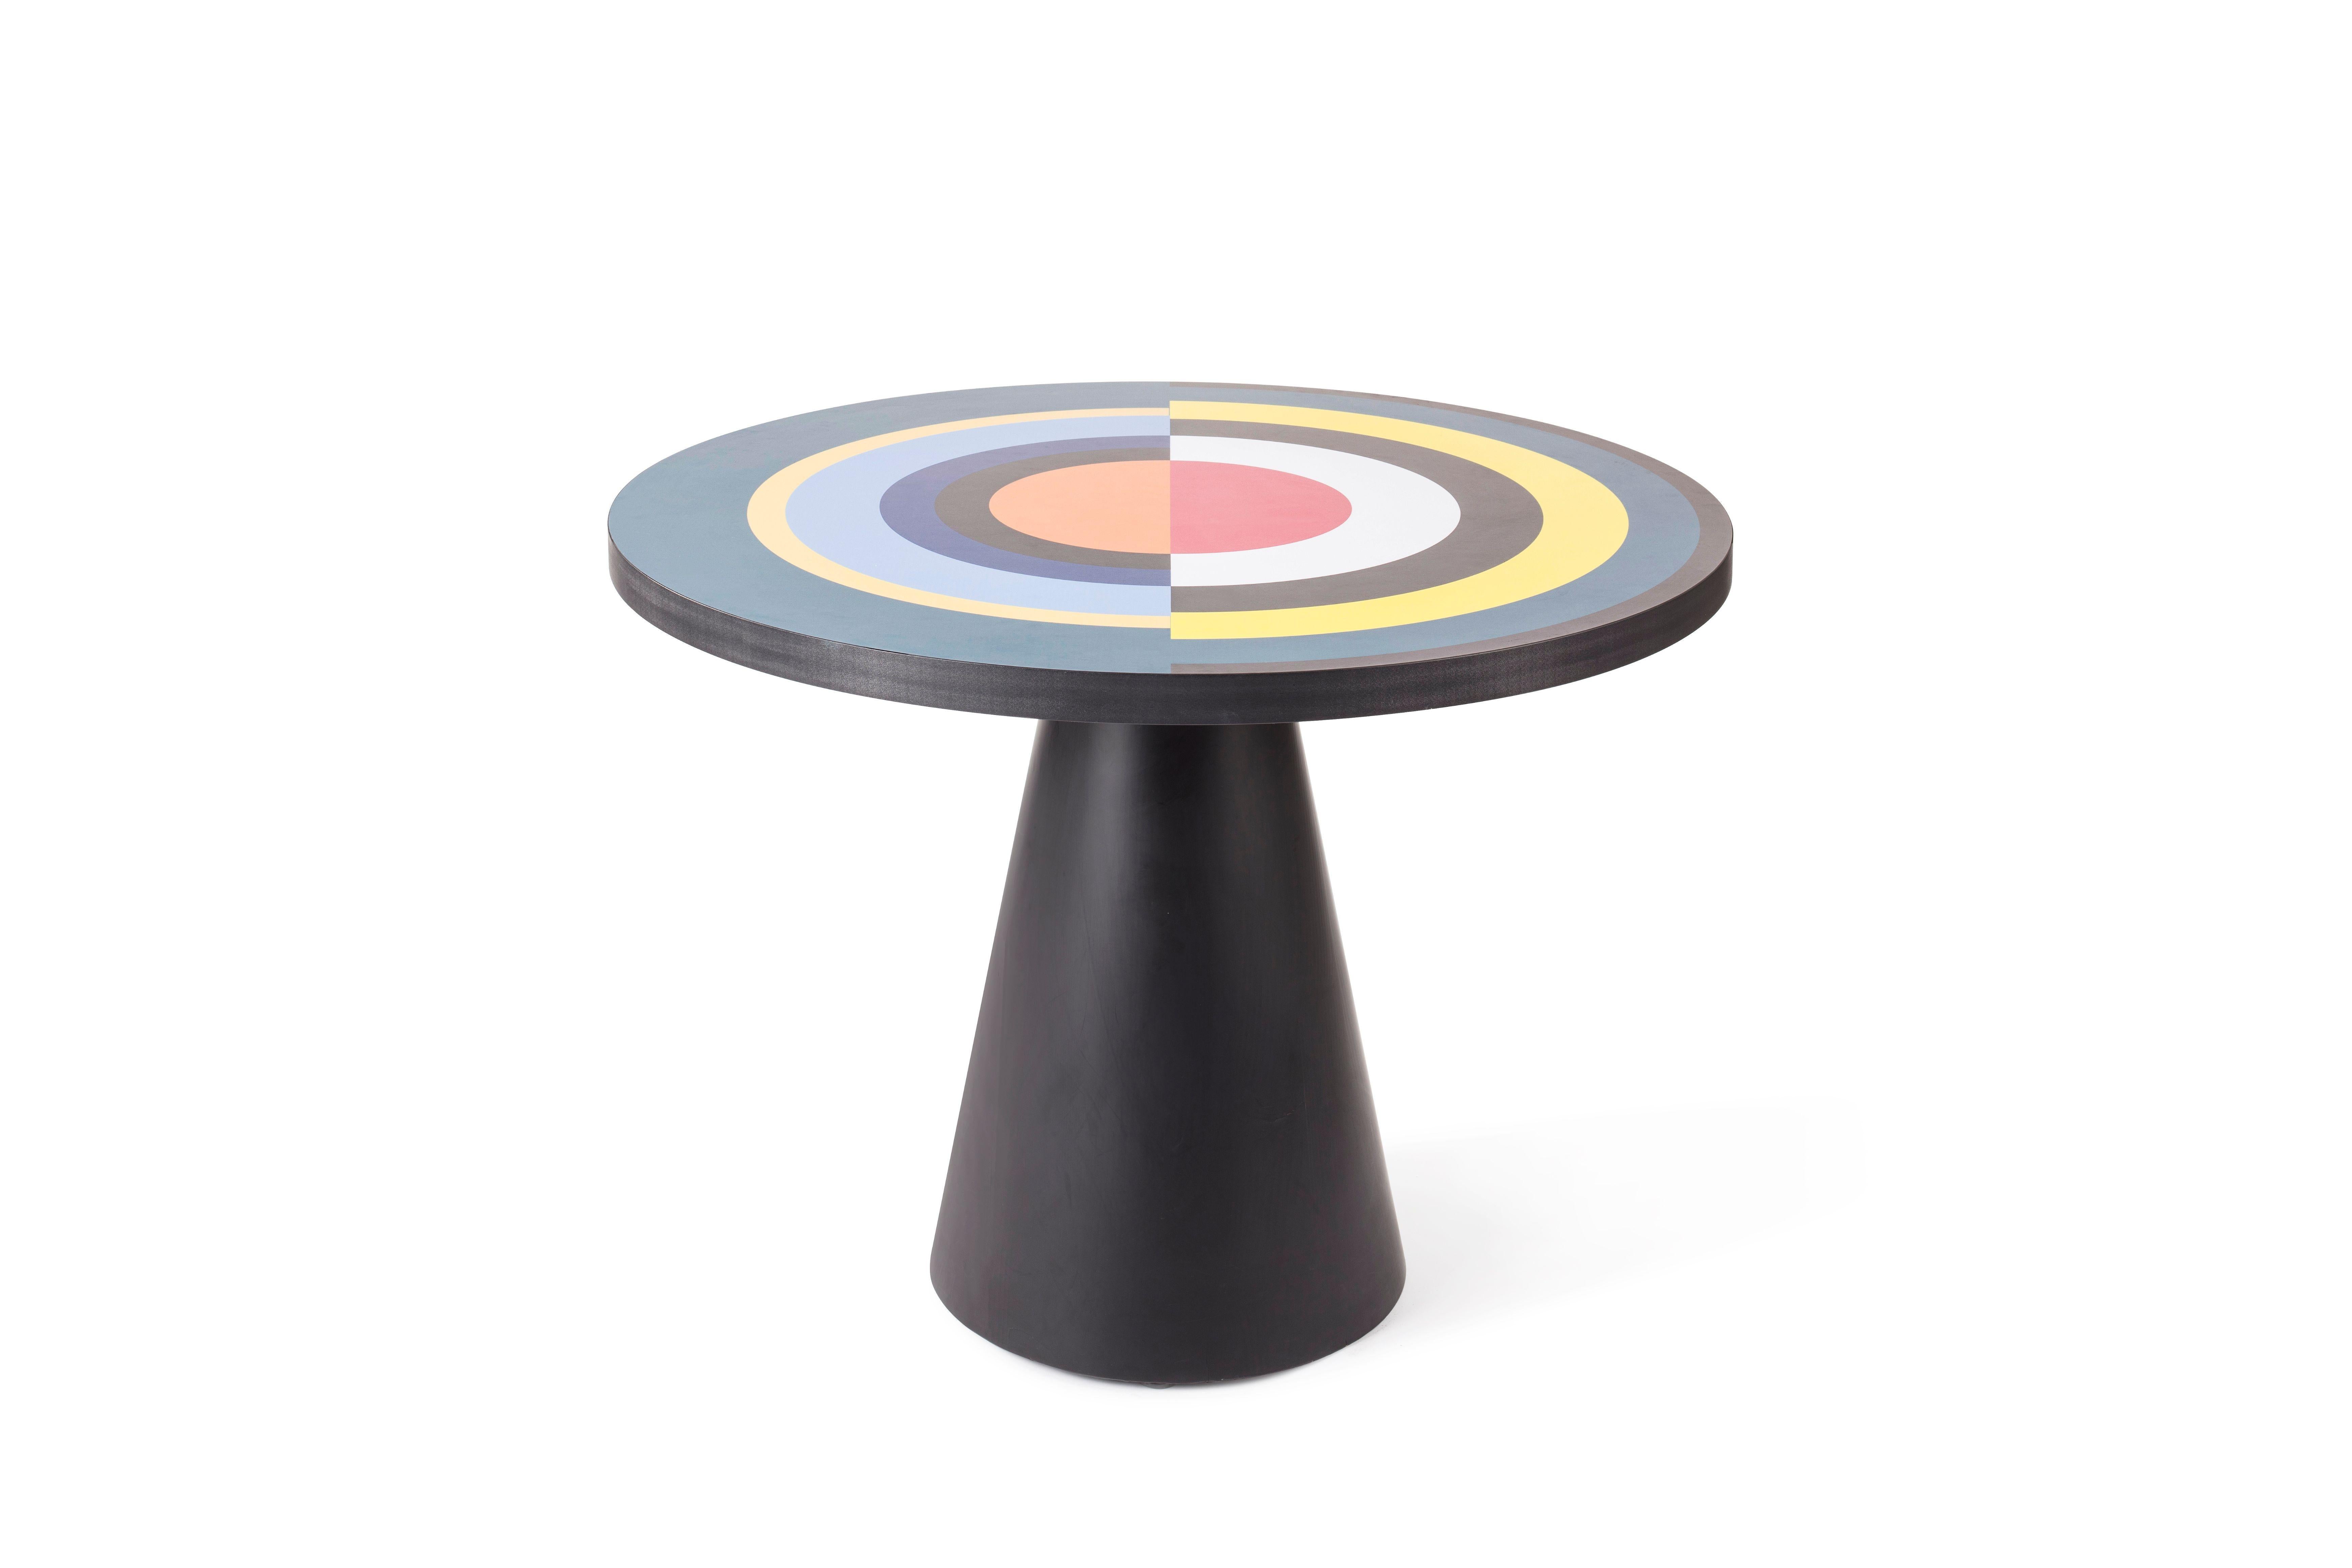 Homage to Delaunay dining table by Thomas Dariel, Maison Dada
Measures: Diametr 80 or diameter 100 or diameter 115 x height 74 cm
Structure in MDF • Base painted in matte color finish
Printed laminate top
Sonia et Cætera pays homage to the